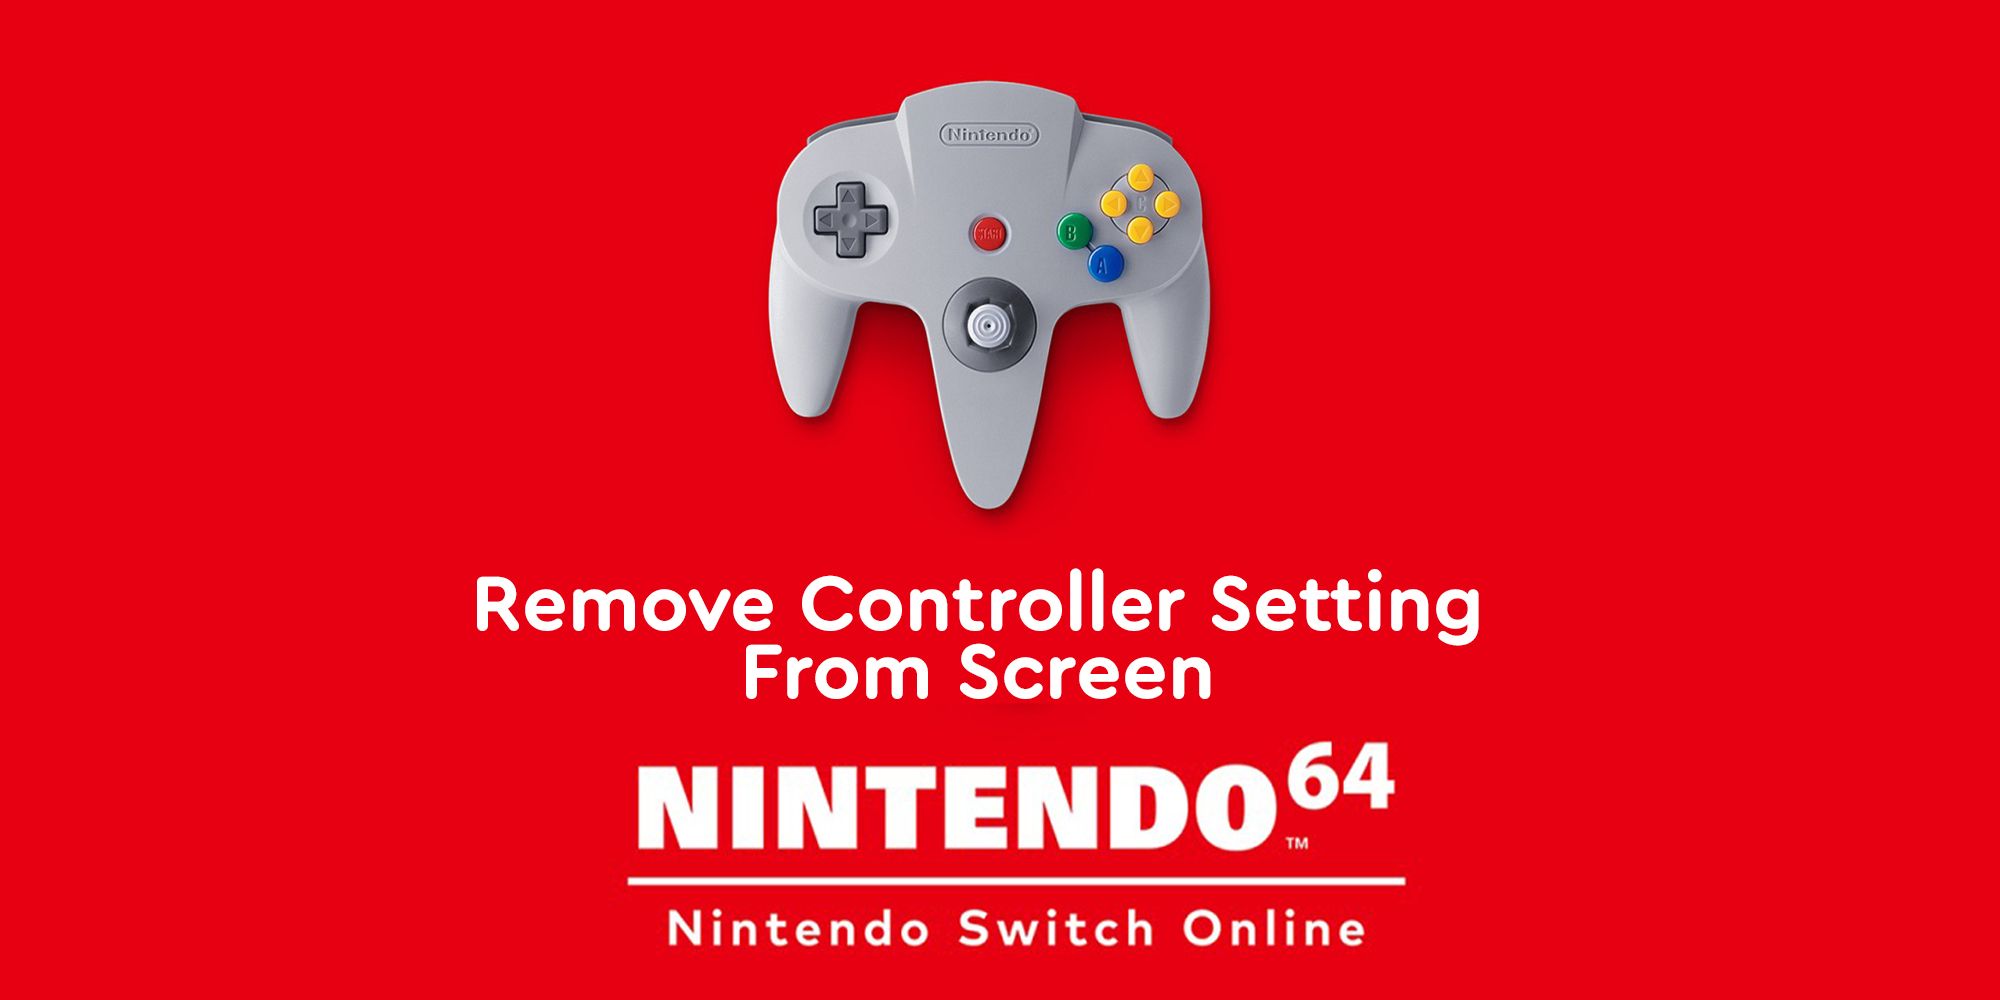 Nintendo Switch Online How To Remove Controller Settings From Screen